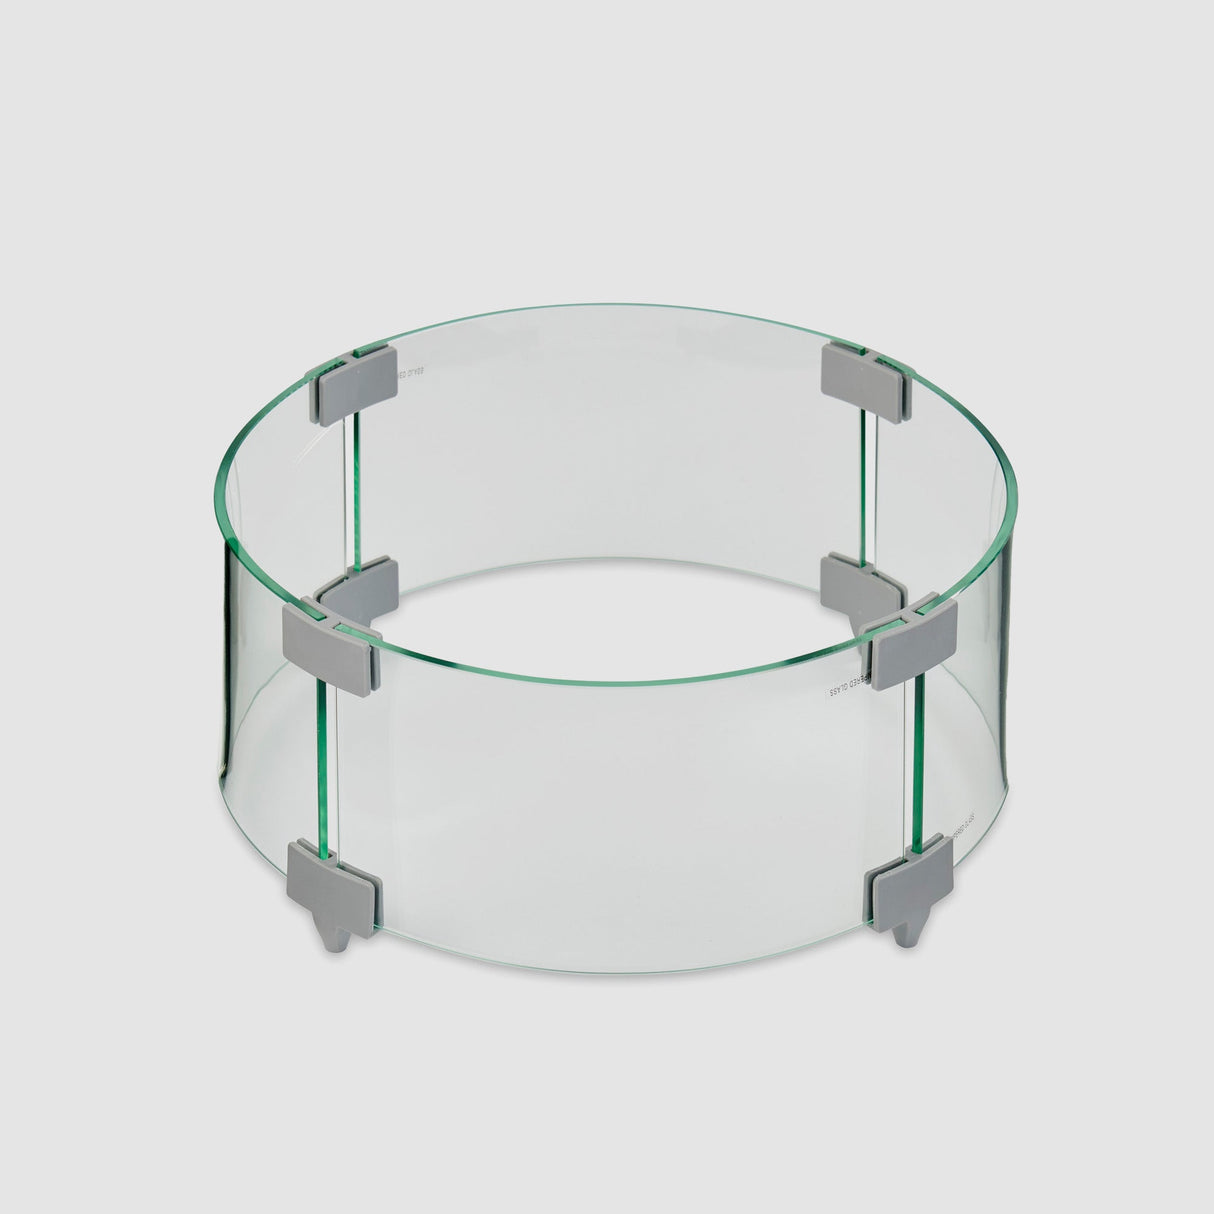 A 12" Round Glass Wind Guard set up on a white background